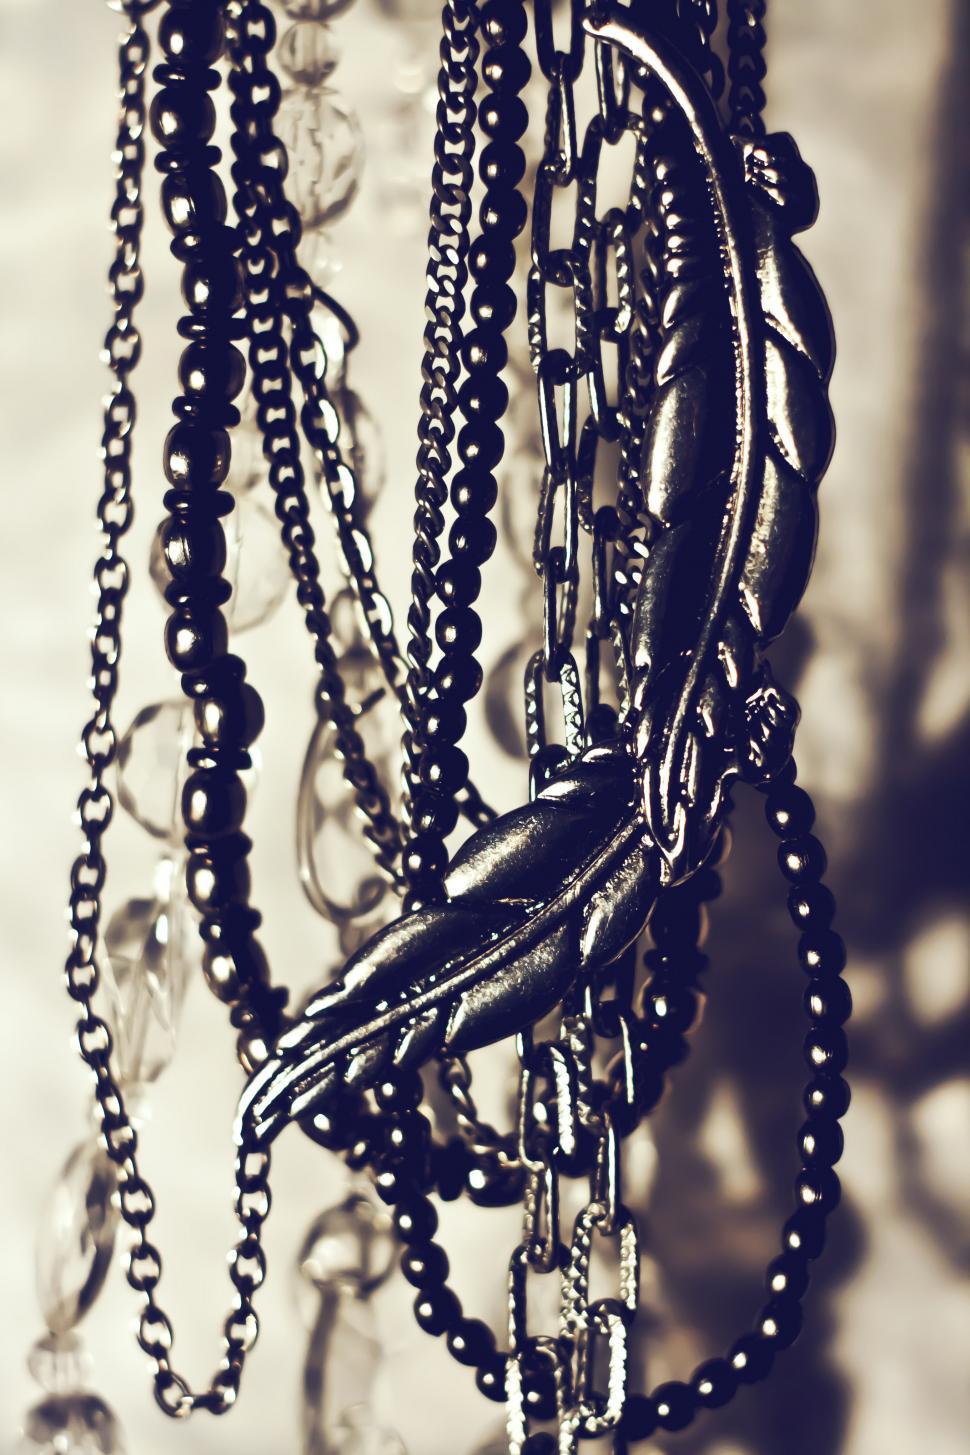 Free Image of Beads Hanging From Chandelier 